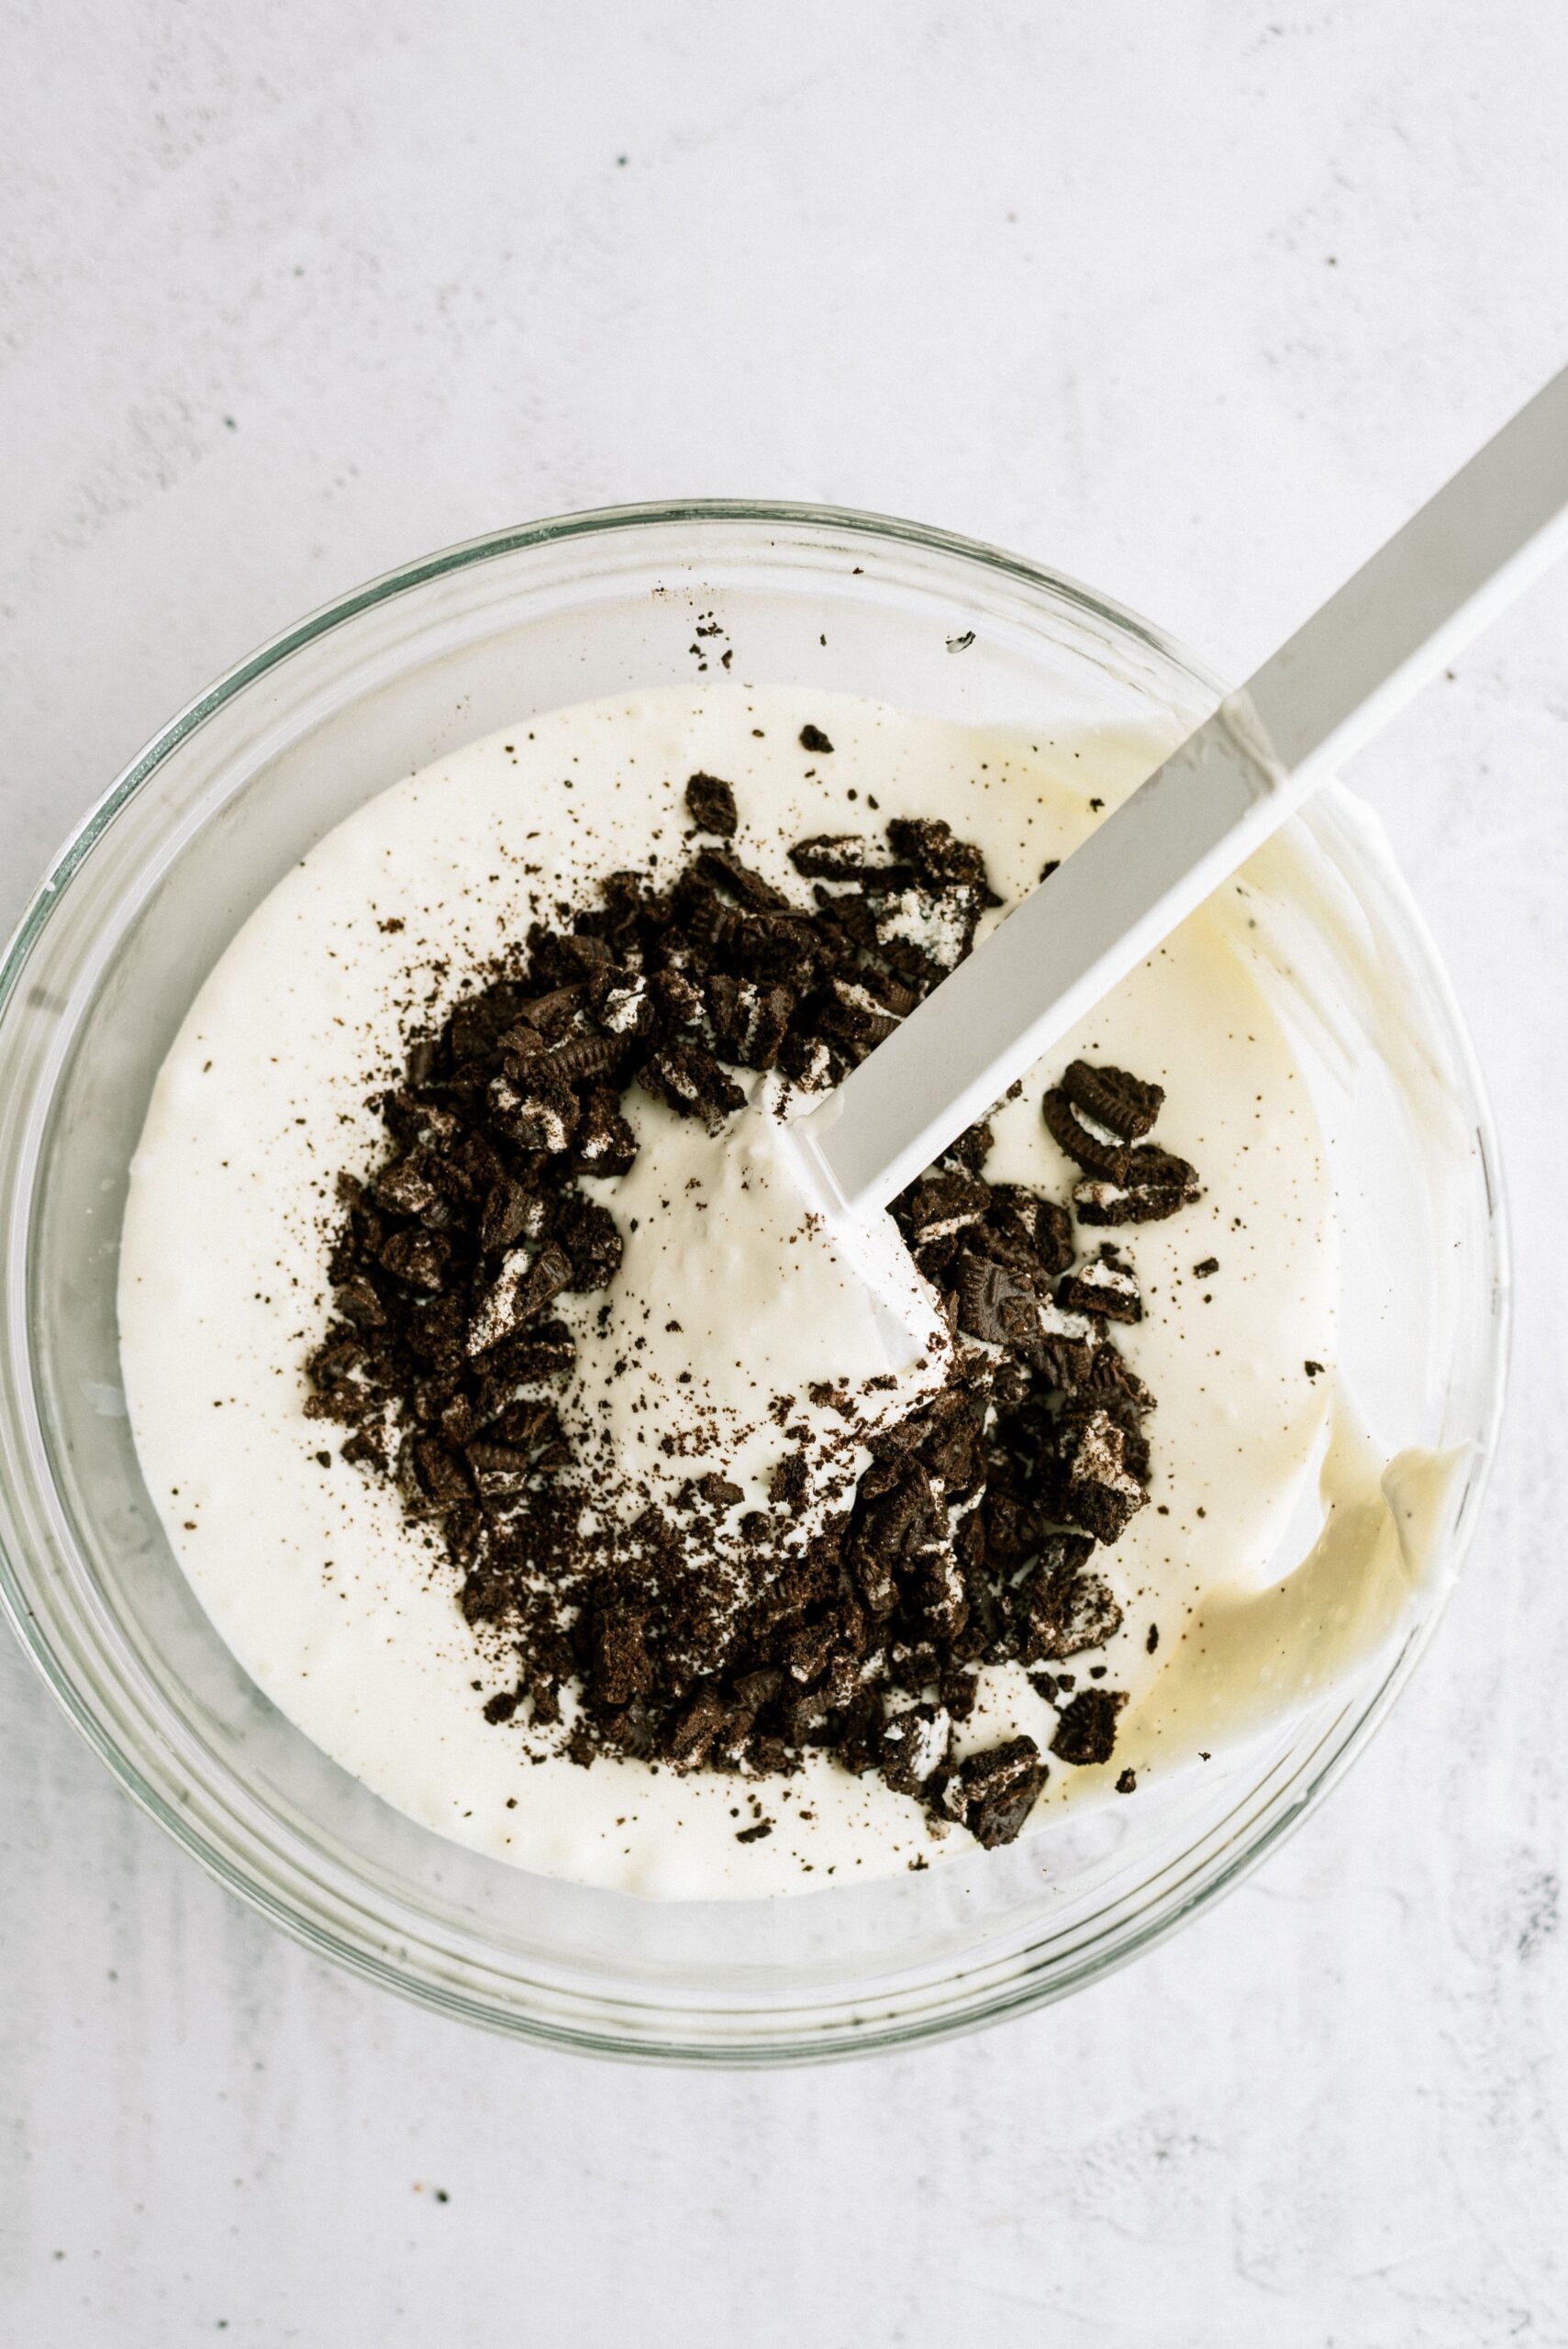 Cream cheese mixture with coarsely chopped oreos